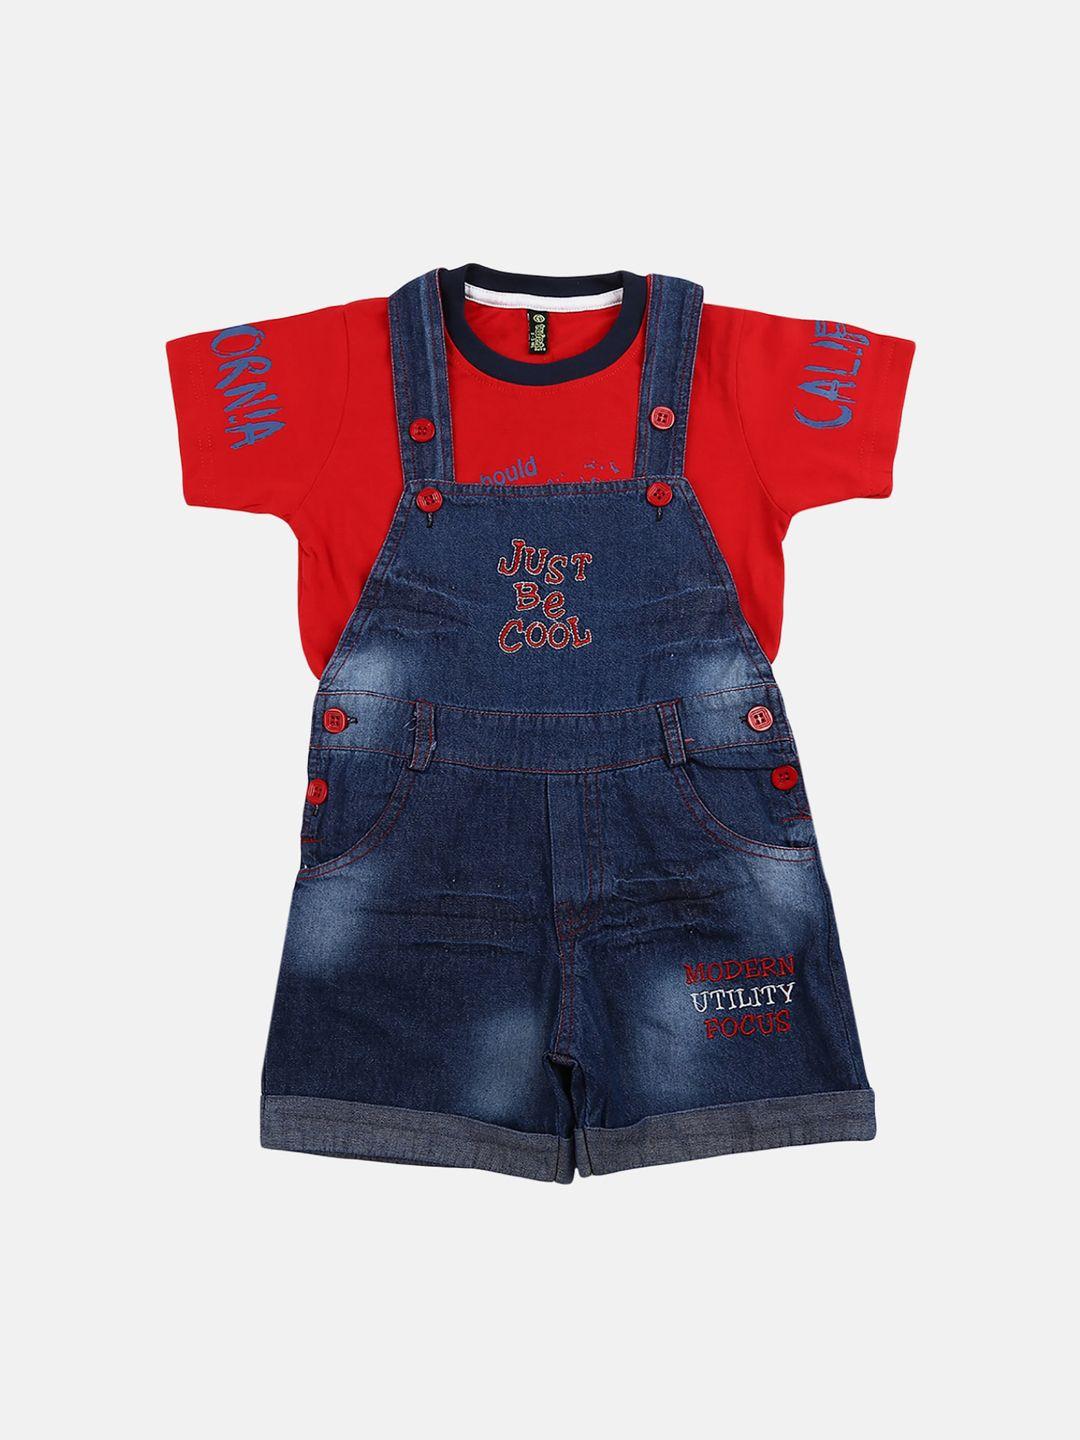 v-mart unisex kids red & blue printed t-shirt with shorts